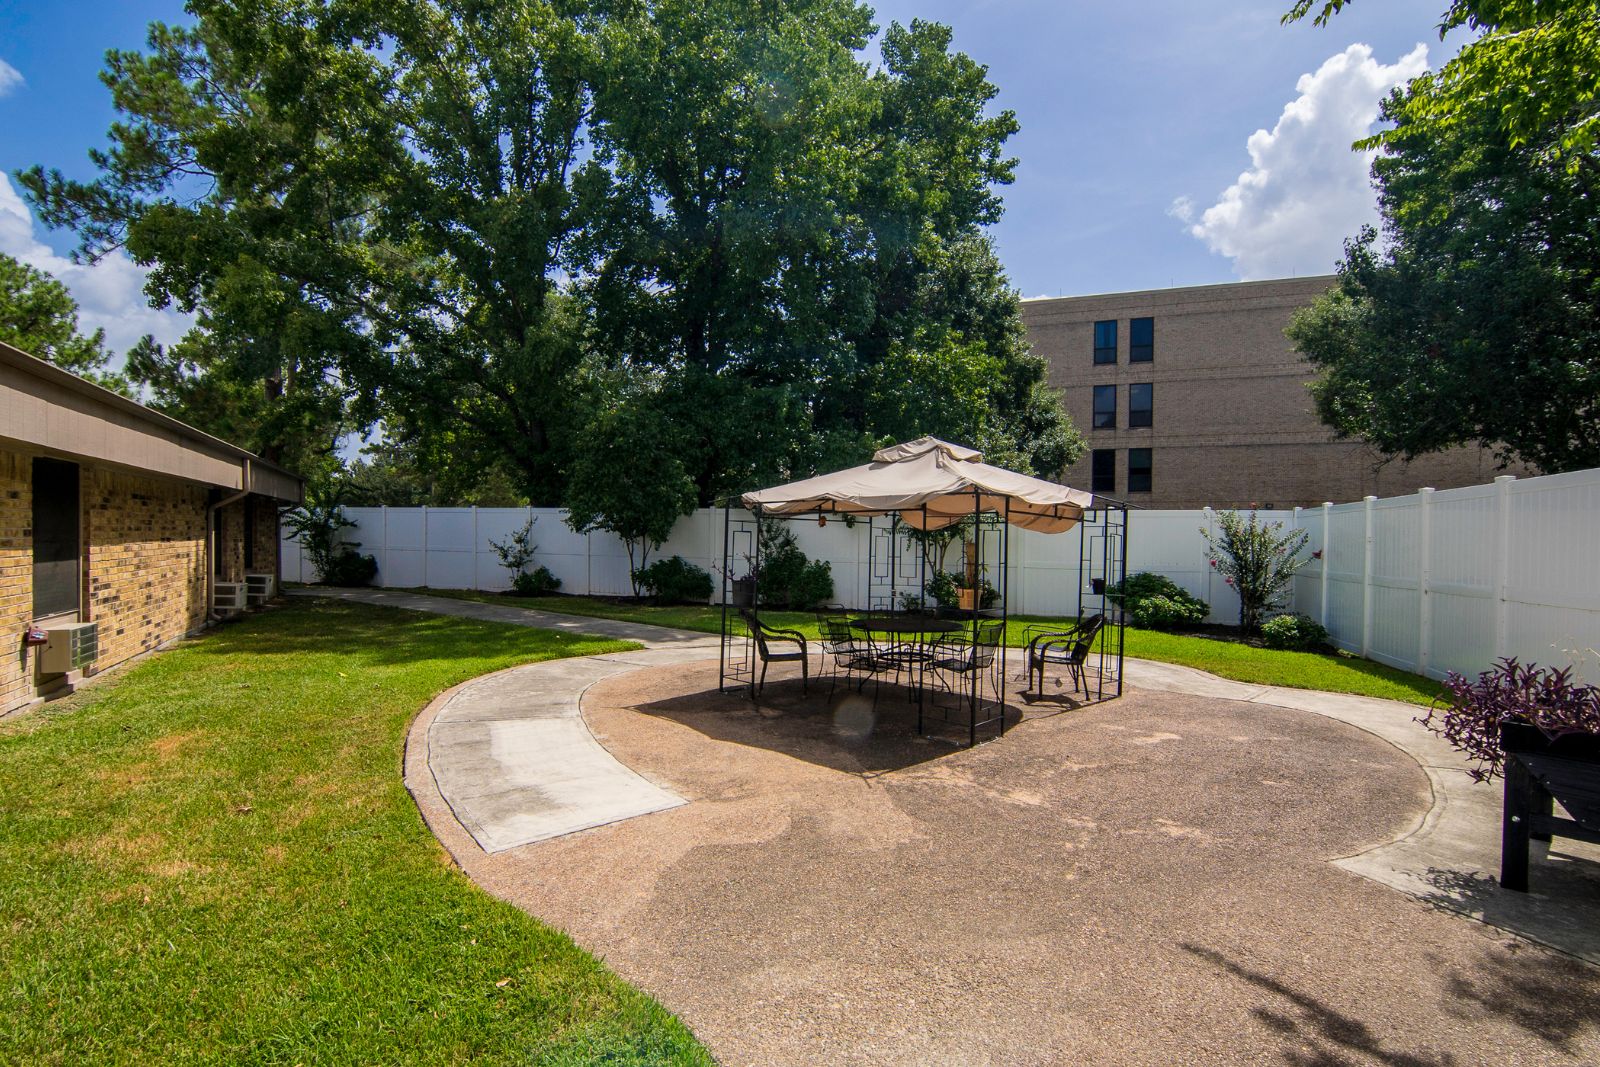 the patio of Lawrence health care center